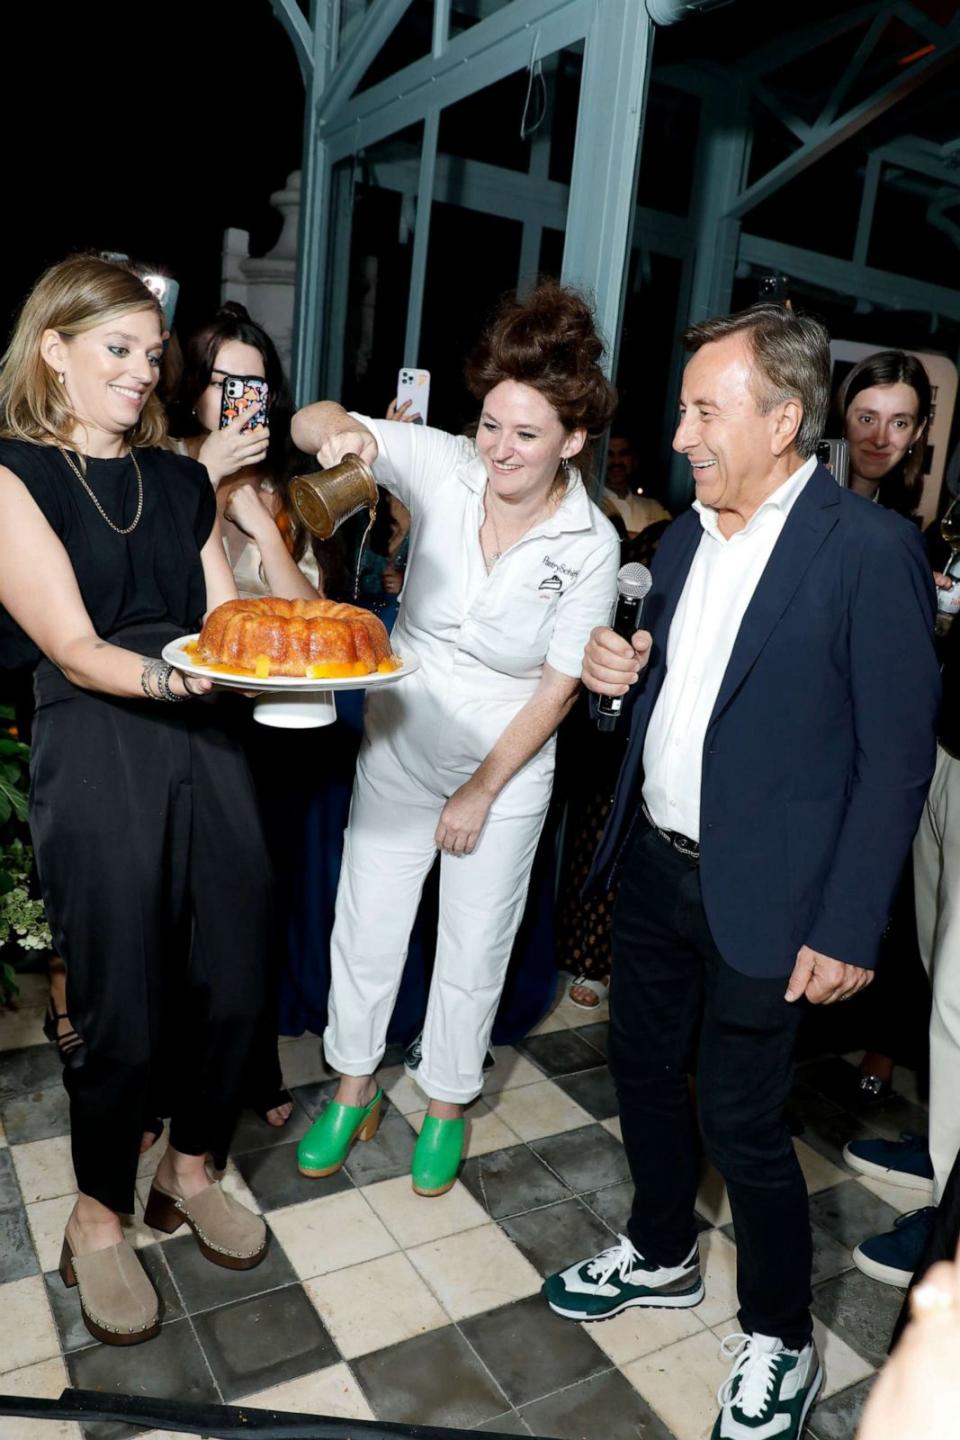 PHOTO: Caroline Schiff and Daniel Boulud at 2023 Food & Wine Best New Chefs at Nine Orchard in New York City, Sept. 12, 2023. (Greg Pace/Shutterstock)